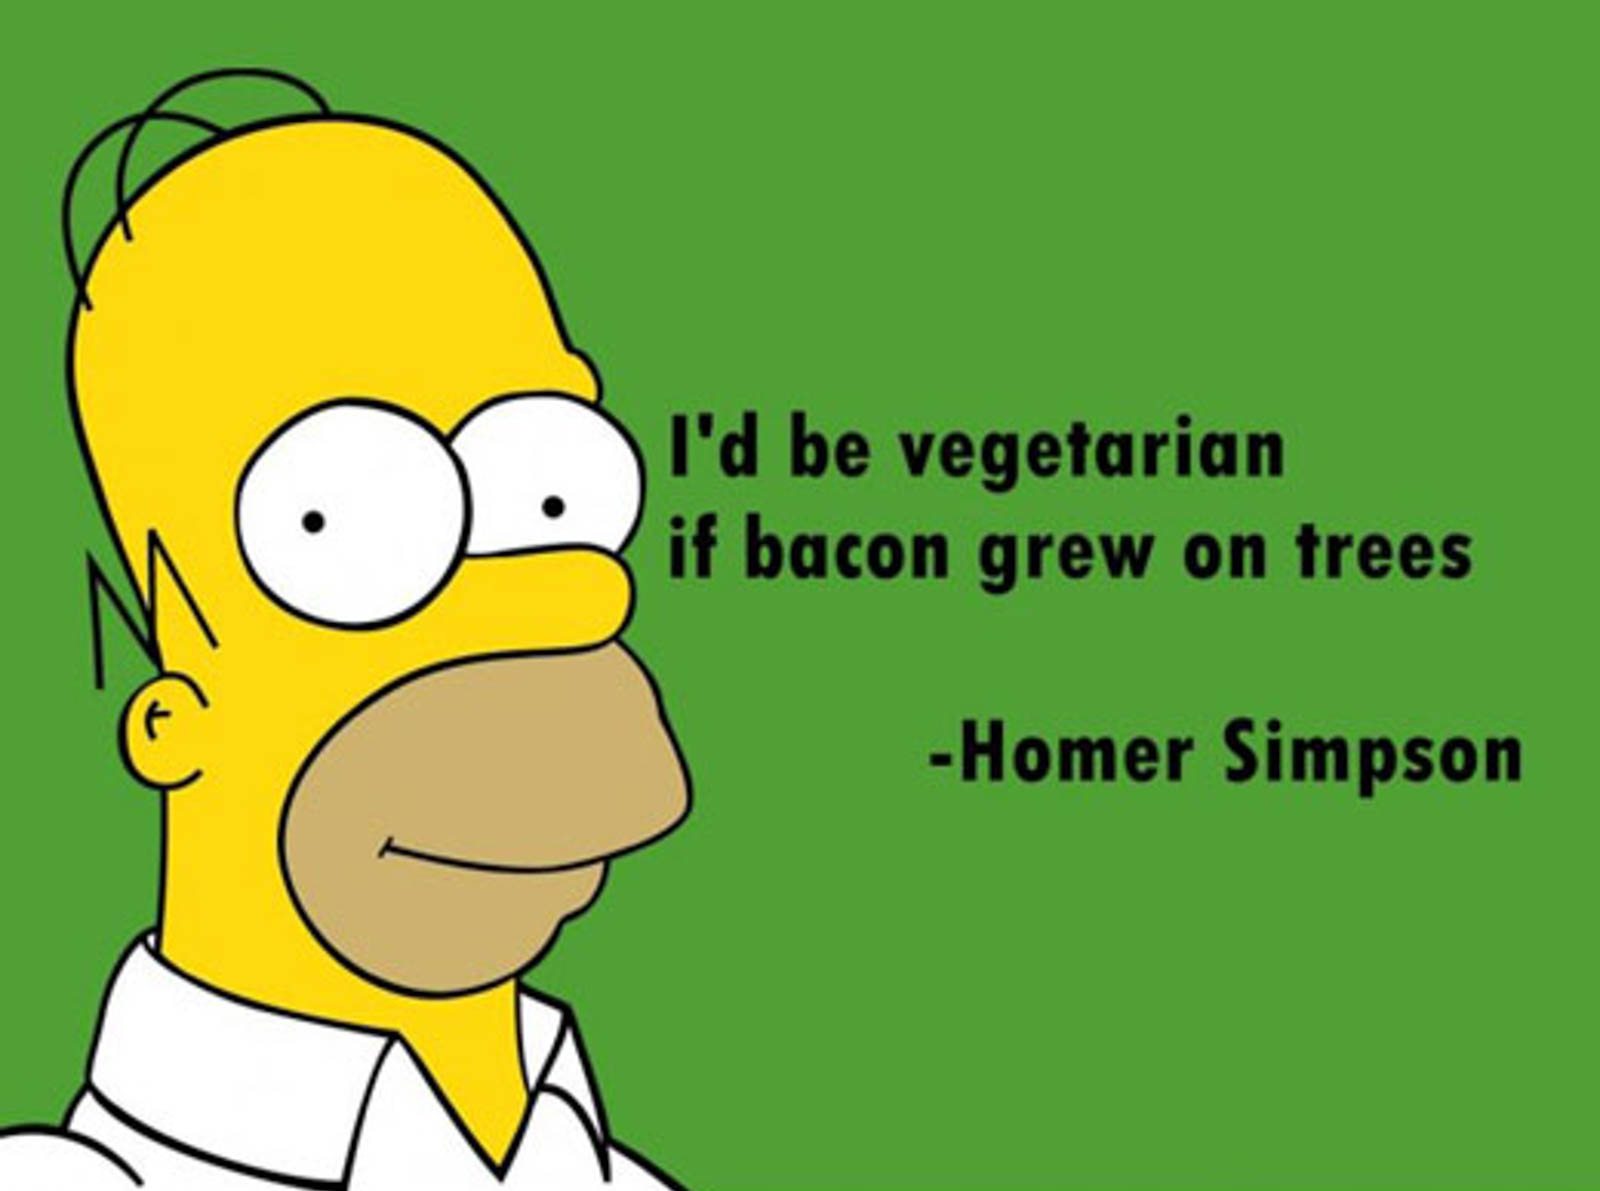 Homer Simpson bacon quote